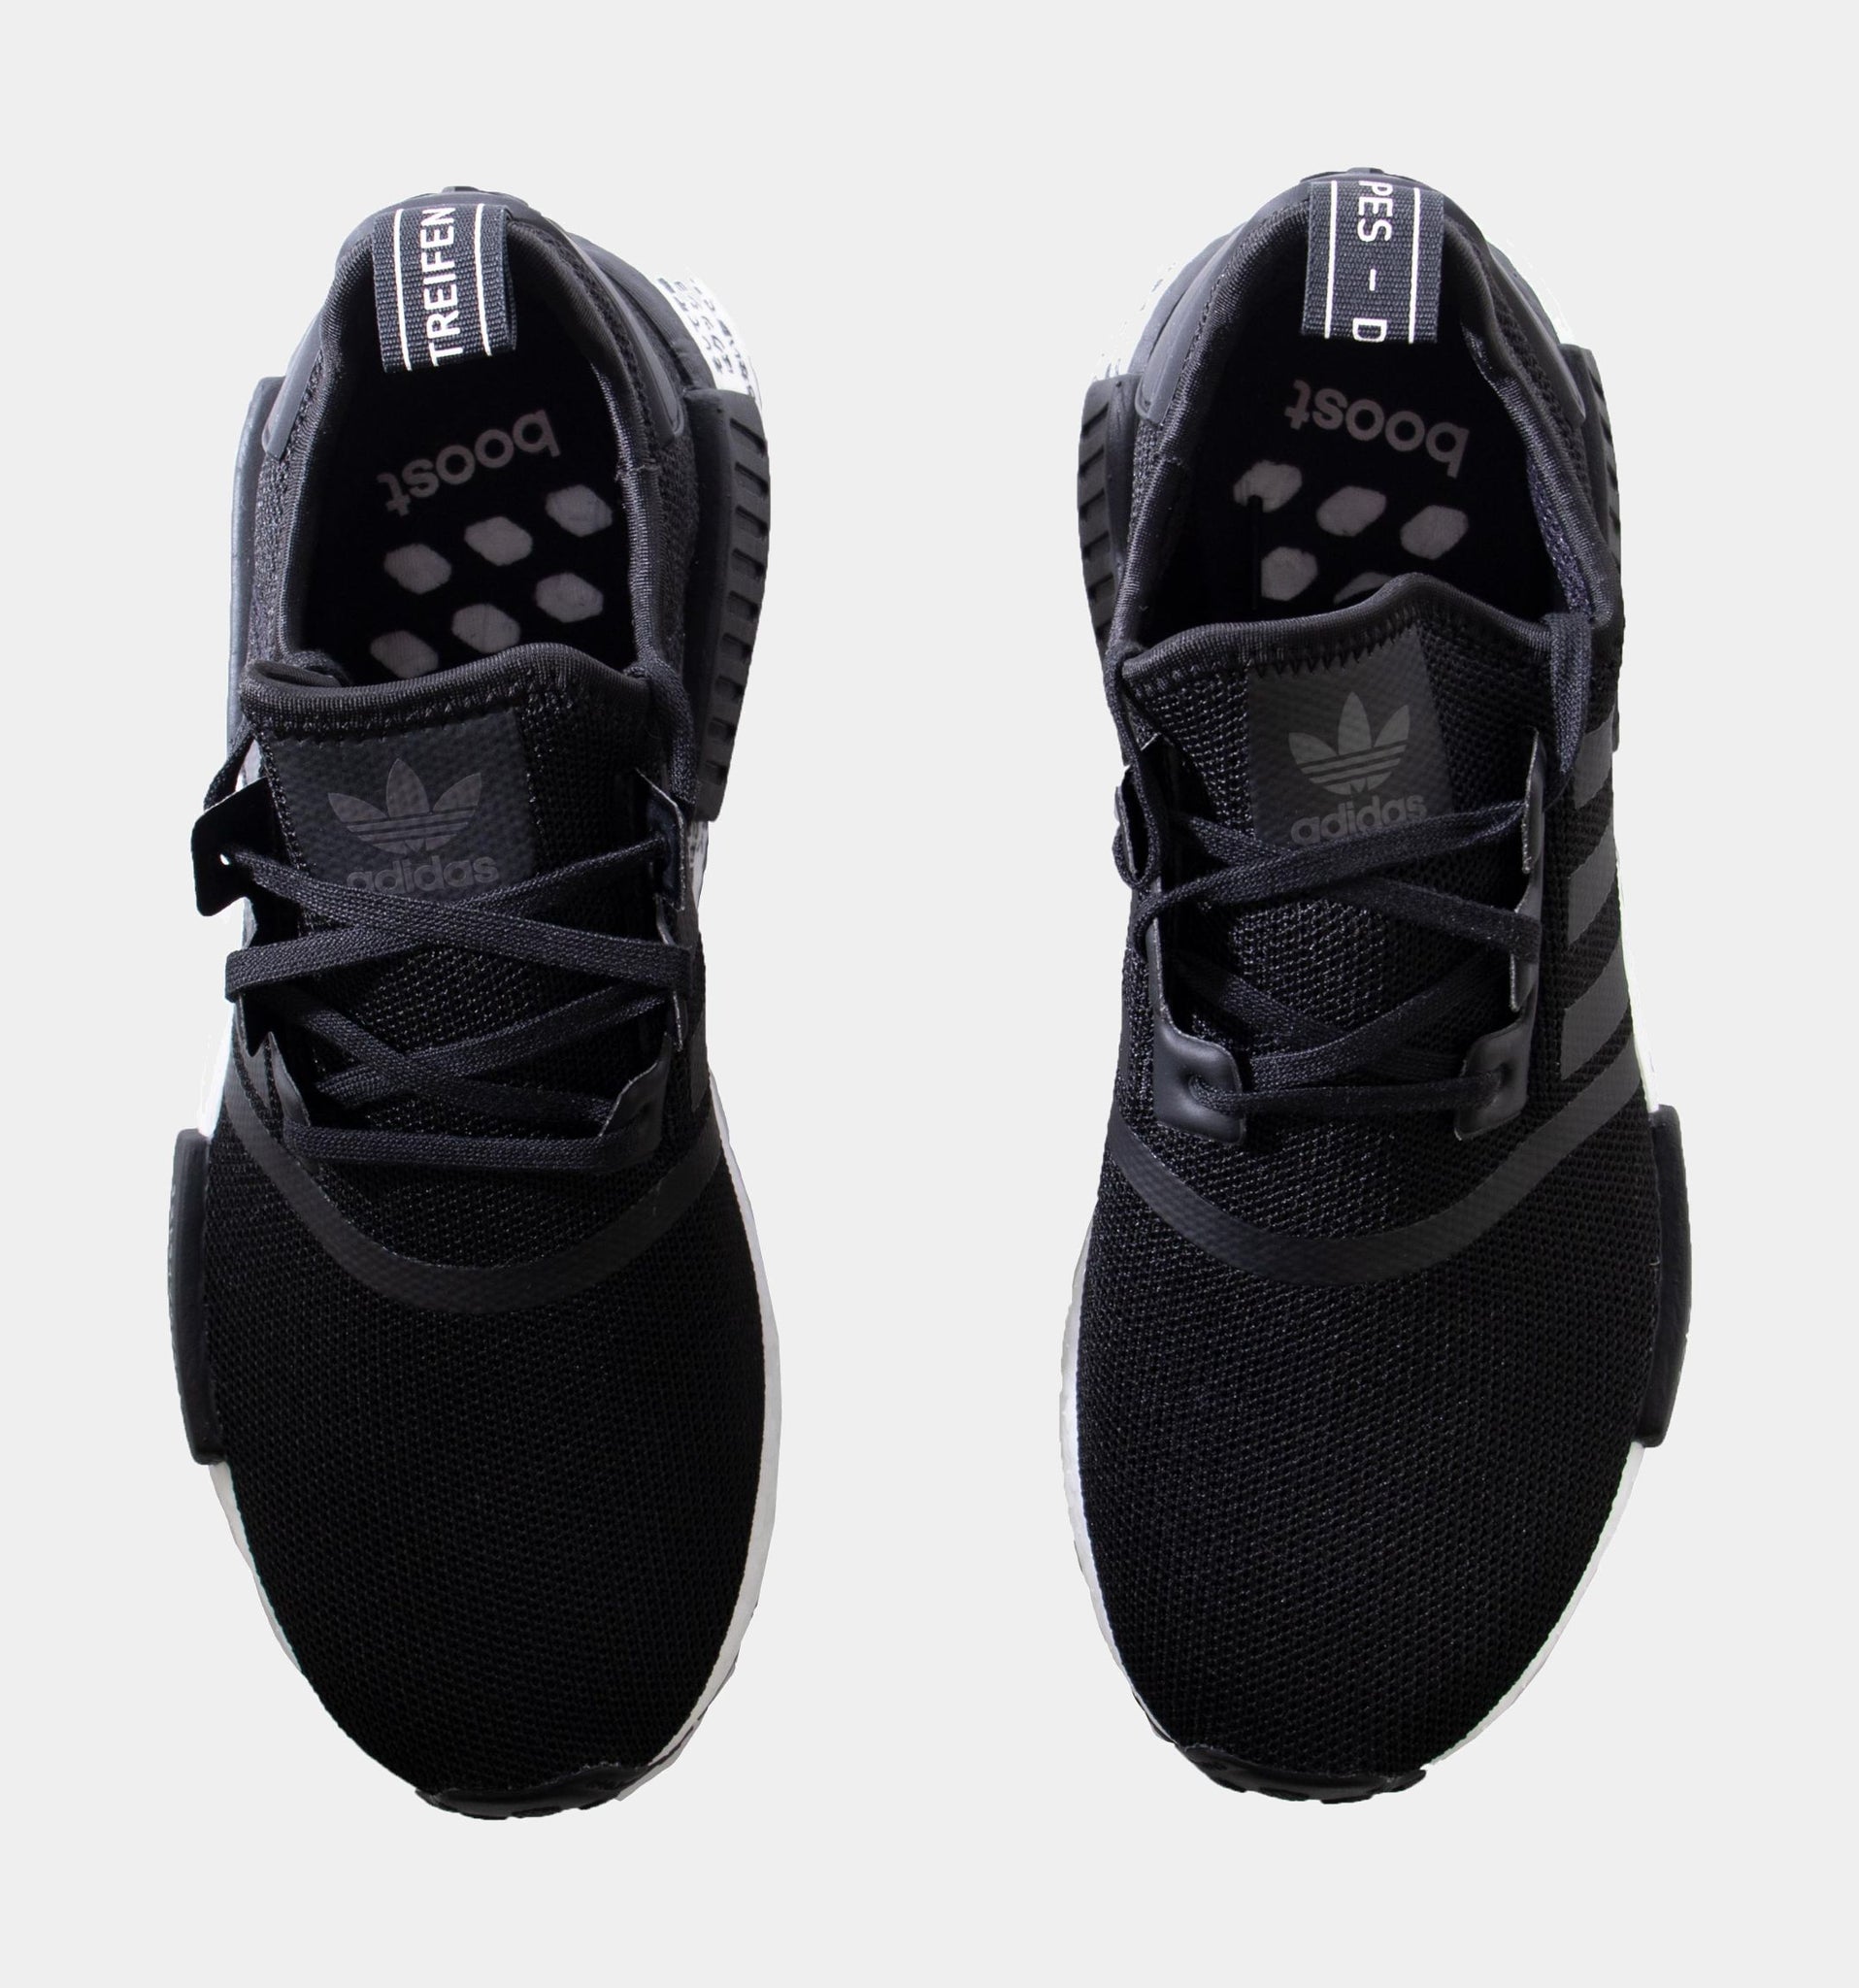 papel A tiempo Productos lácteos adidas NMD R1 Mens Running Shoe Black White FX7893 – Shoe Palace